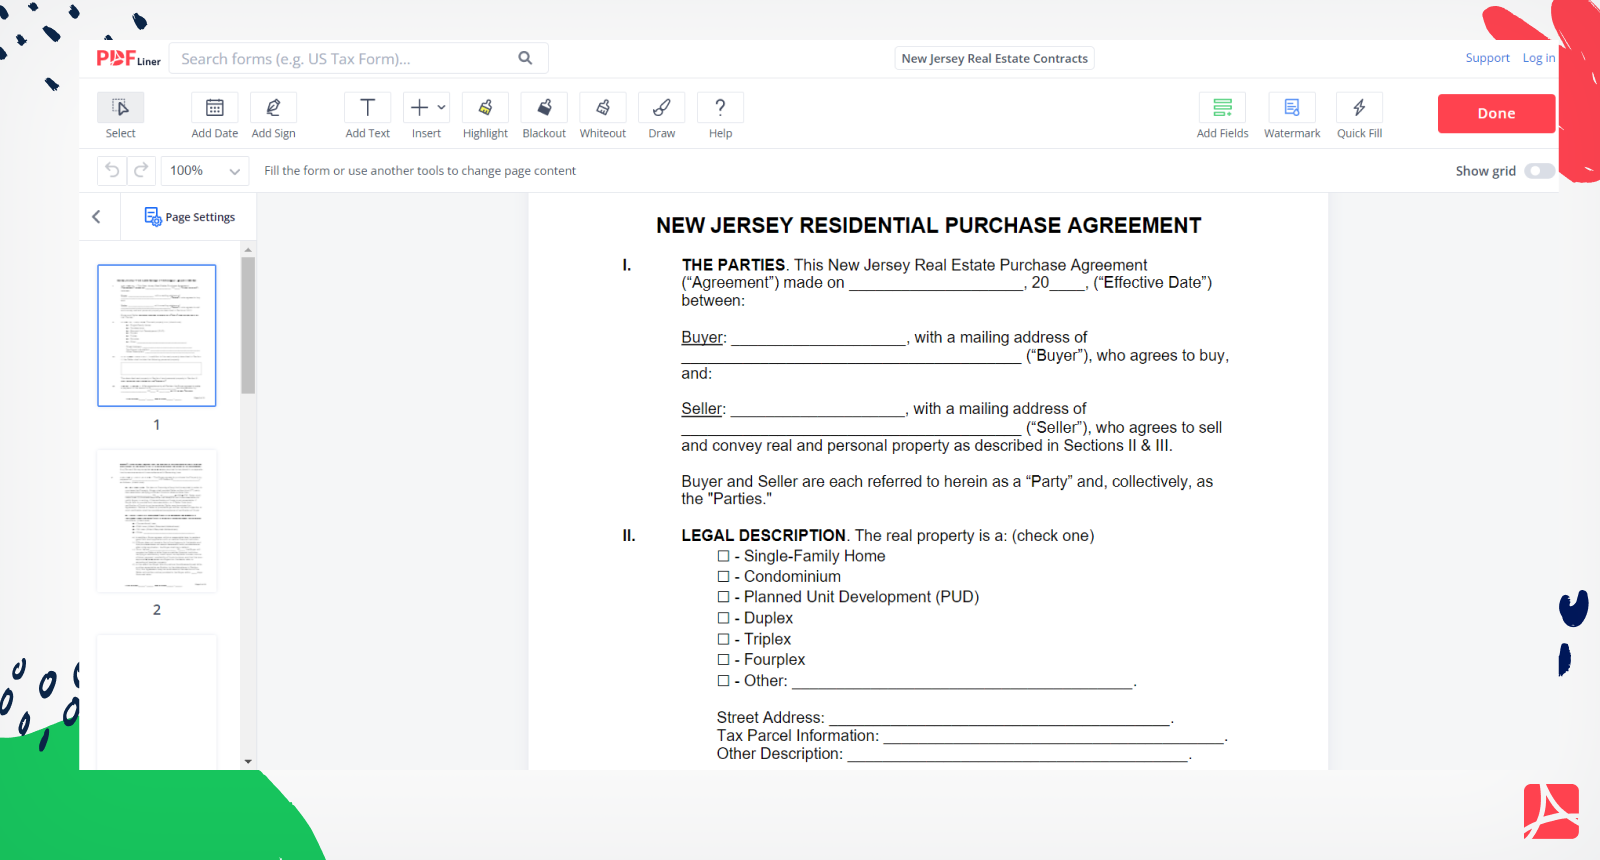 New Jersey Real Estate Contracts Form Screenshot